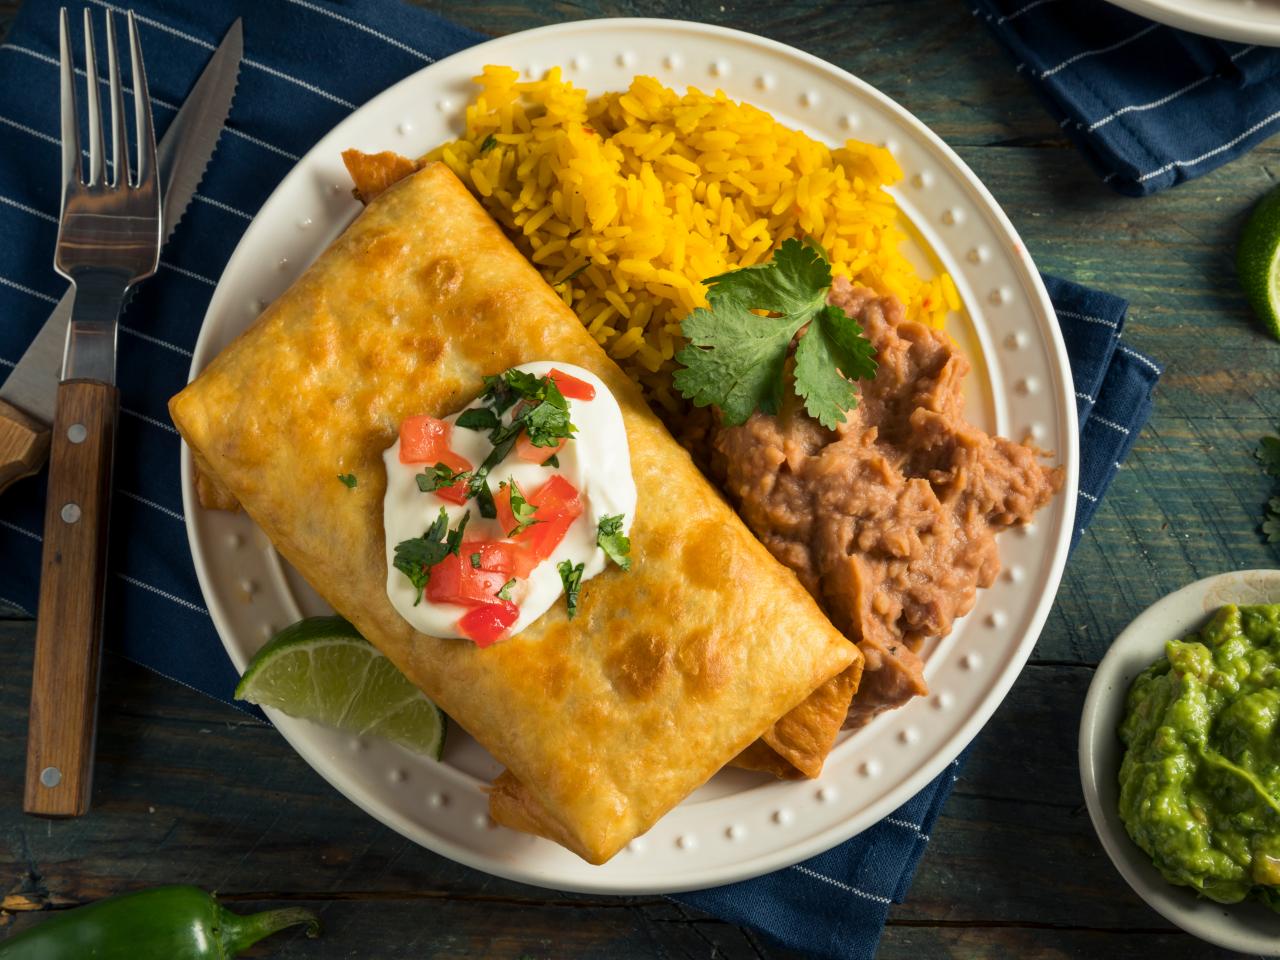 What Is a Chimichanga? And How to Make Chimichangas